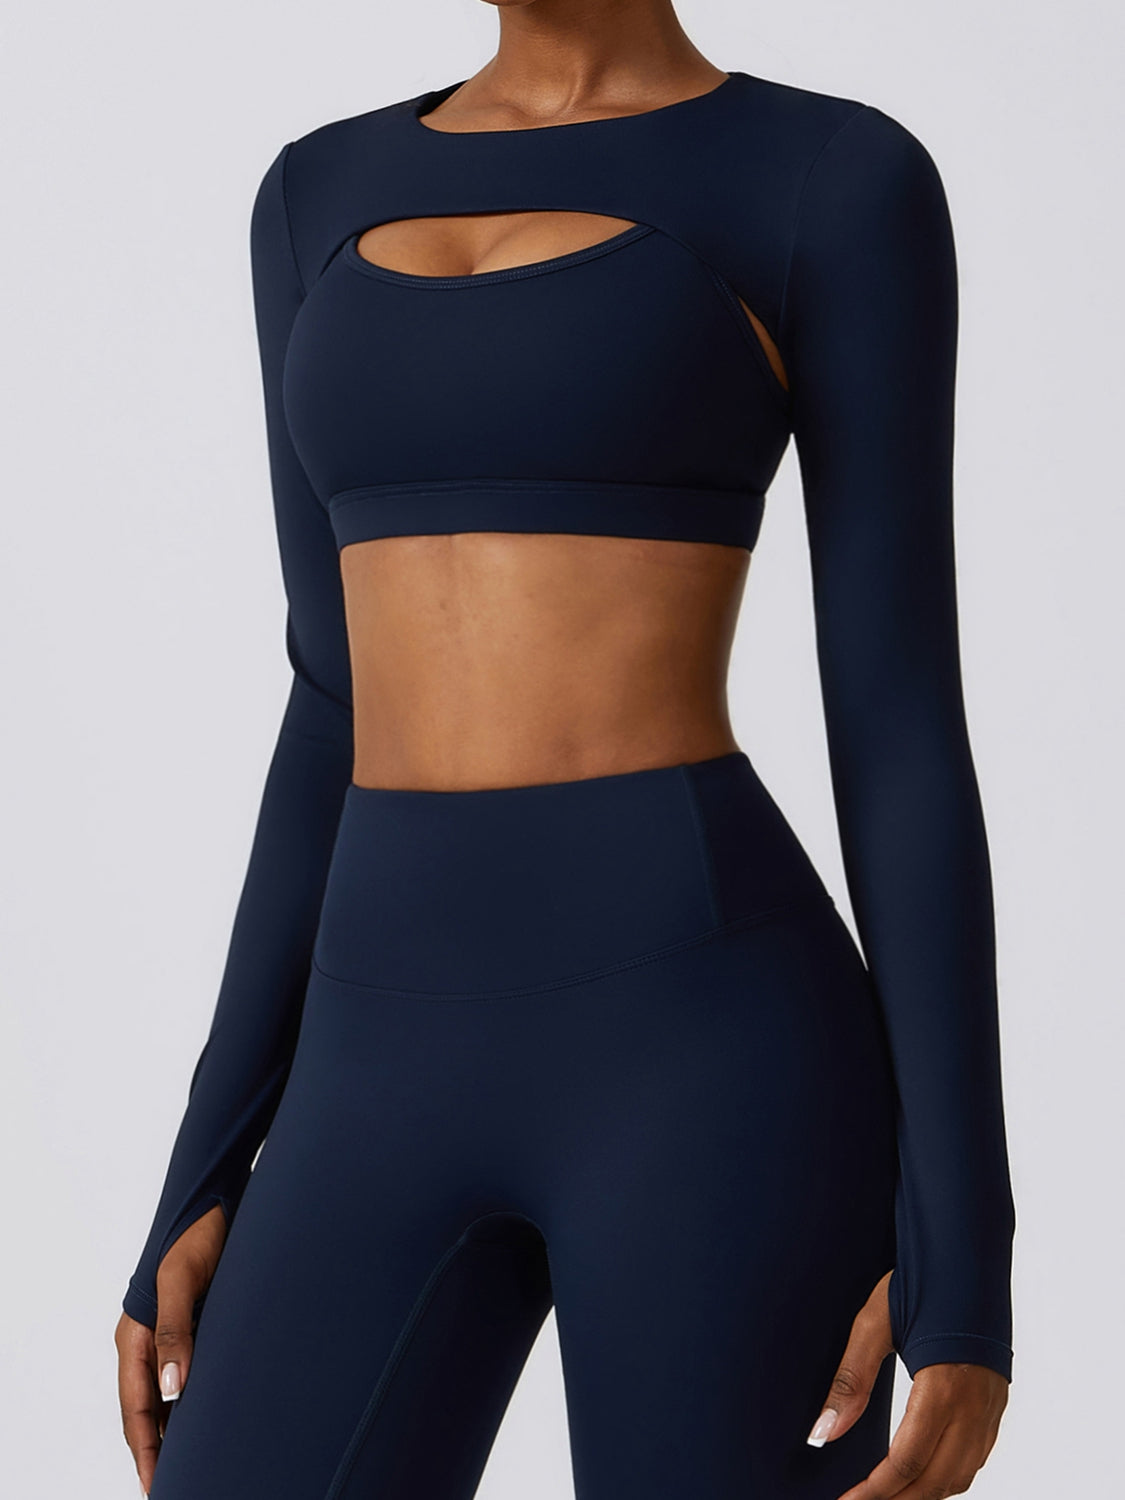 Cropped Cutout Long Sleeve Sports Top_13